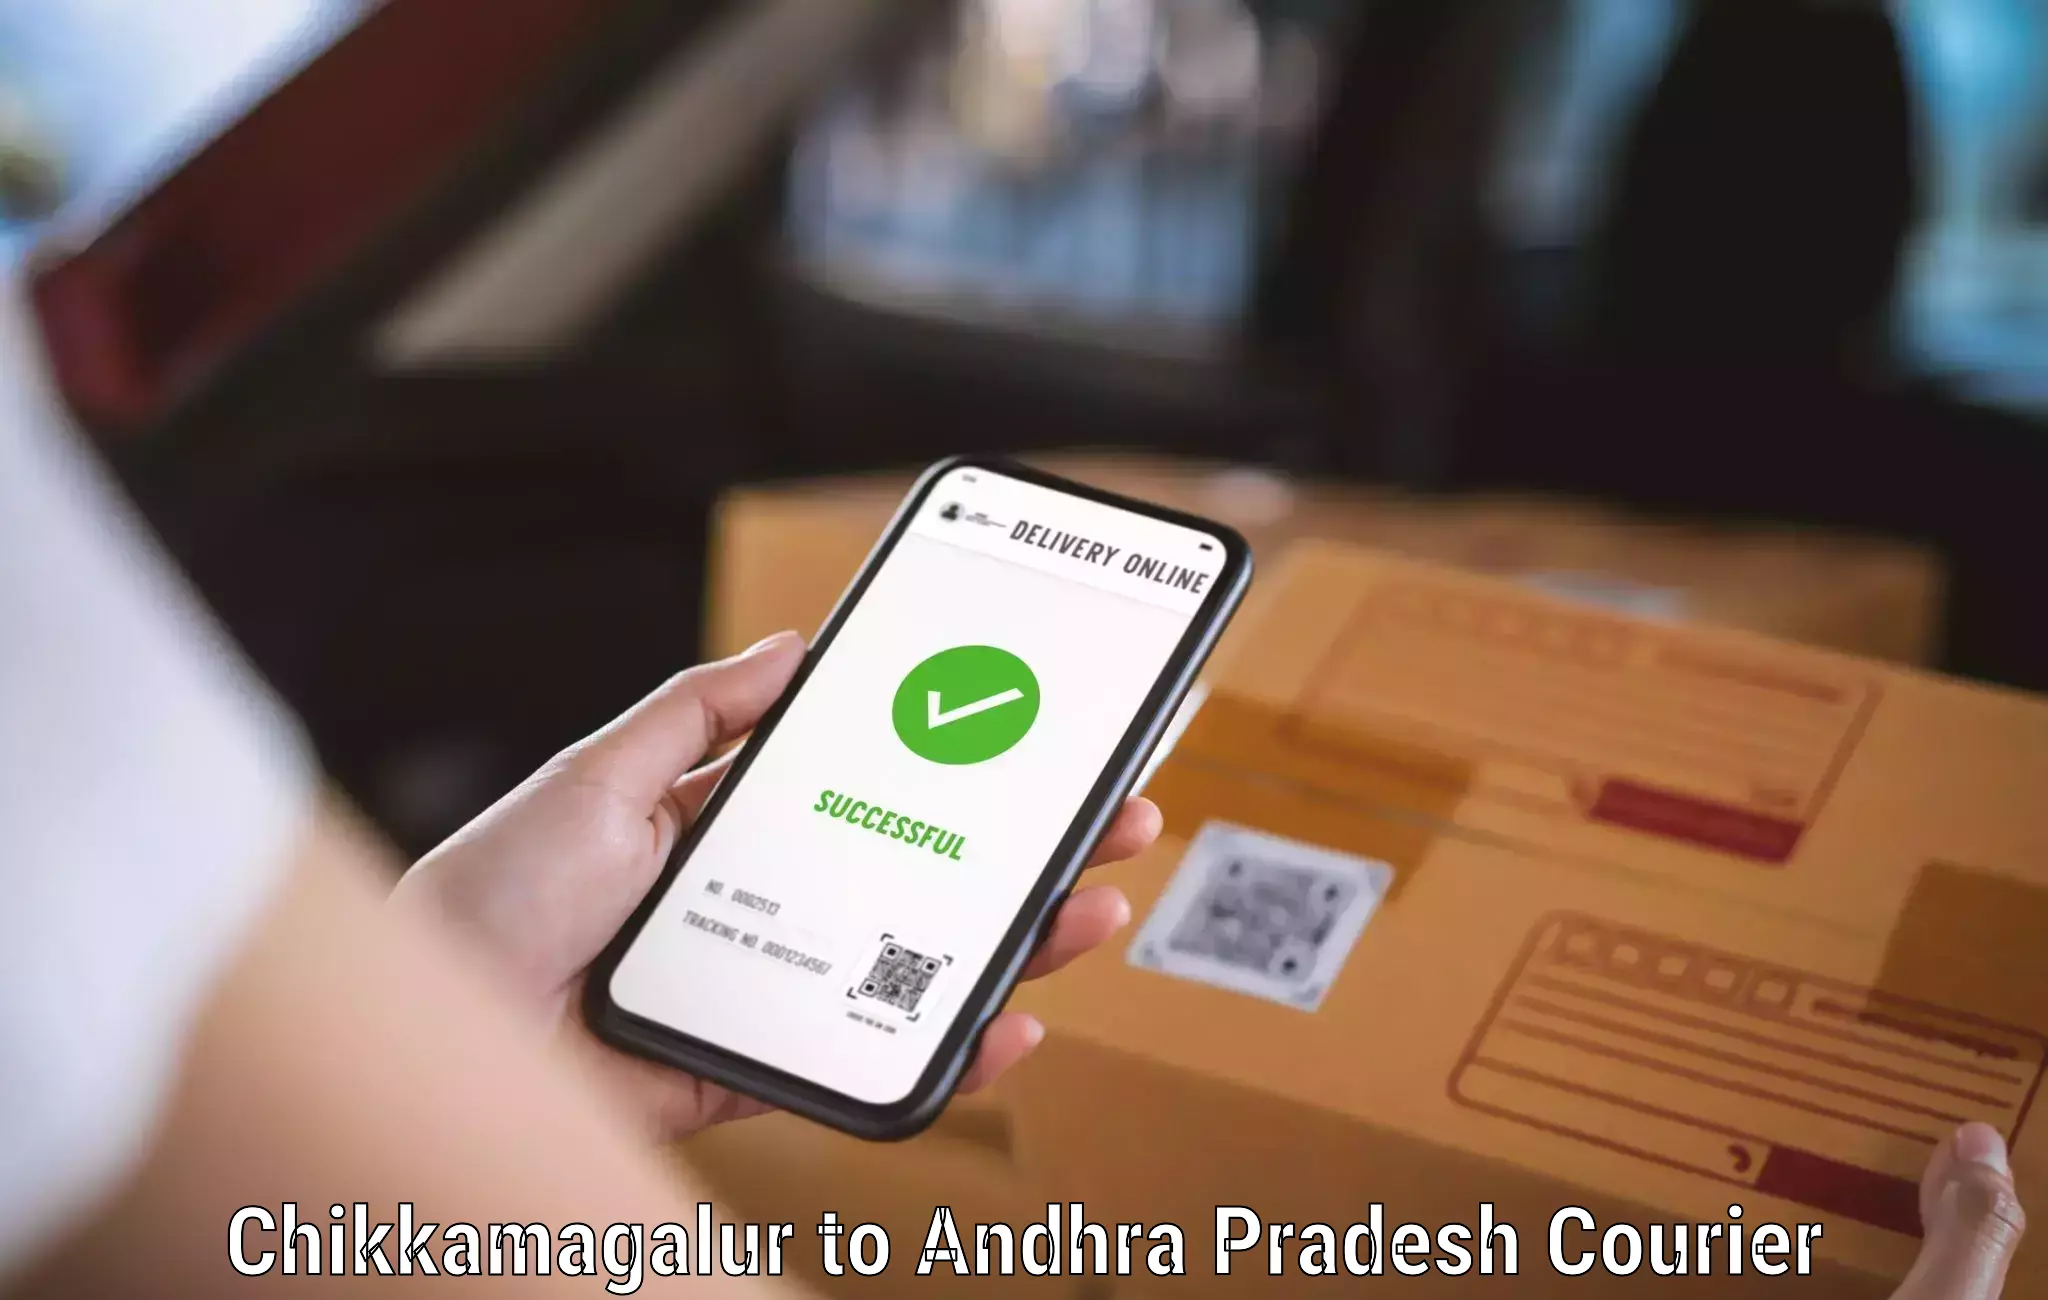 Courier service booking Chikkamagalur to Kudair